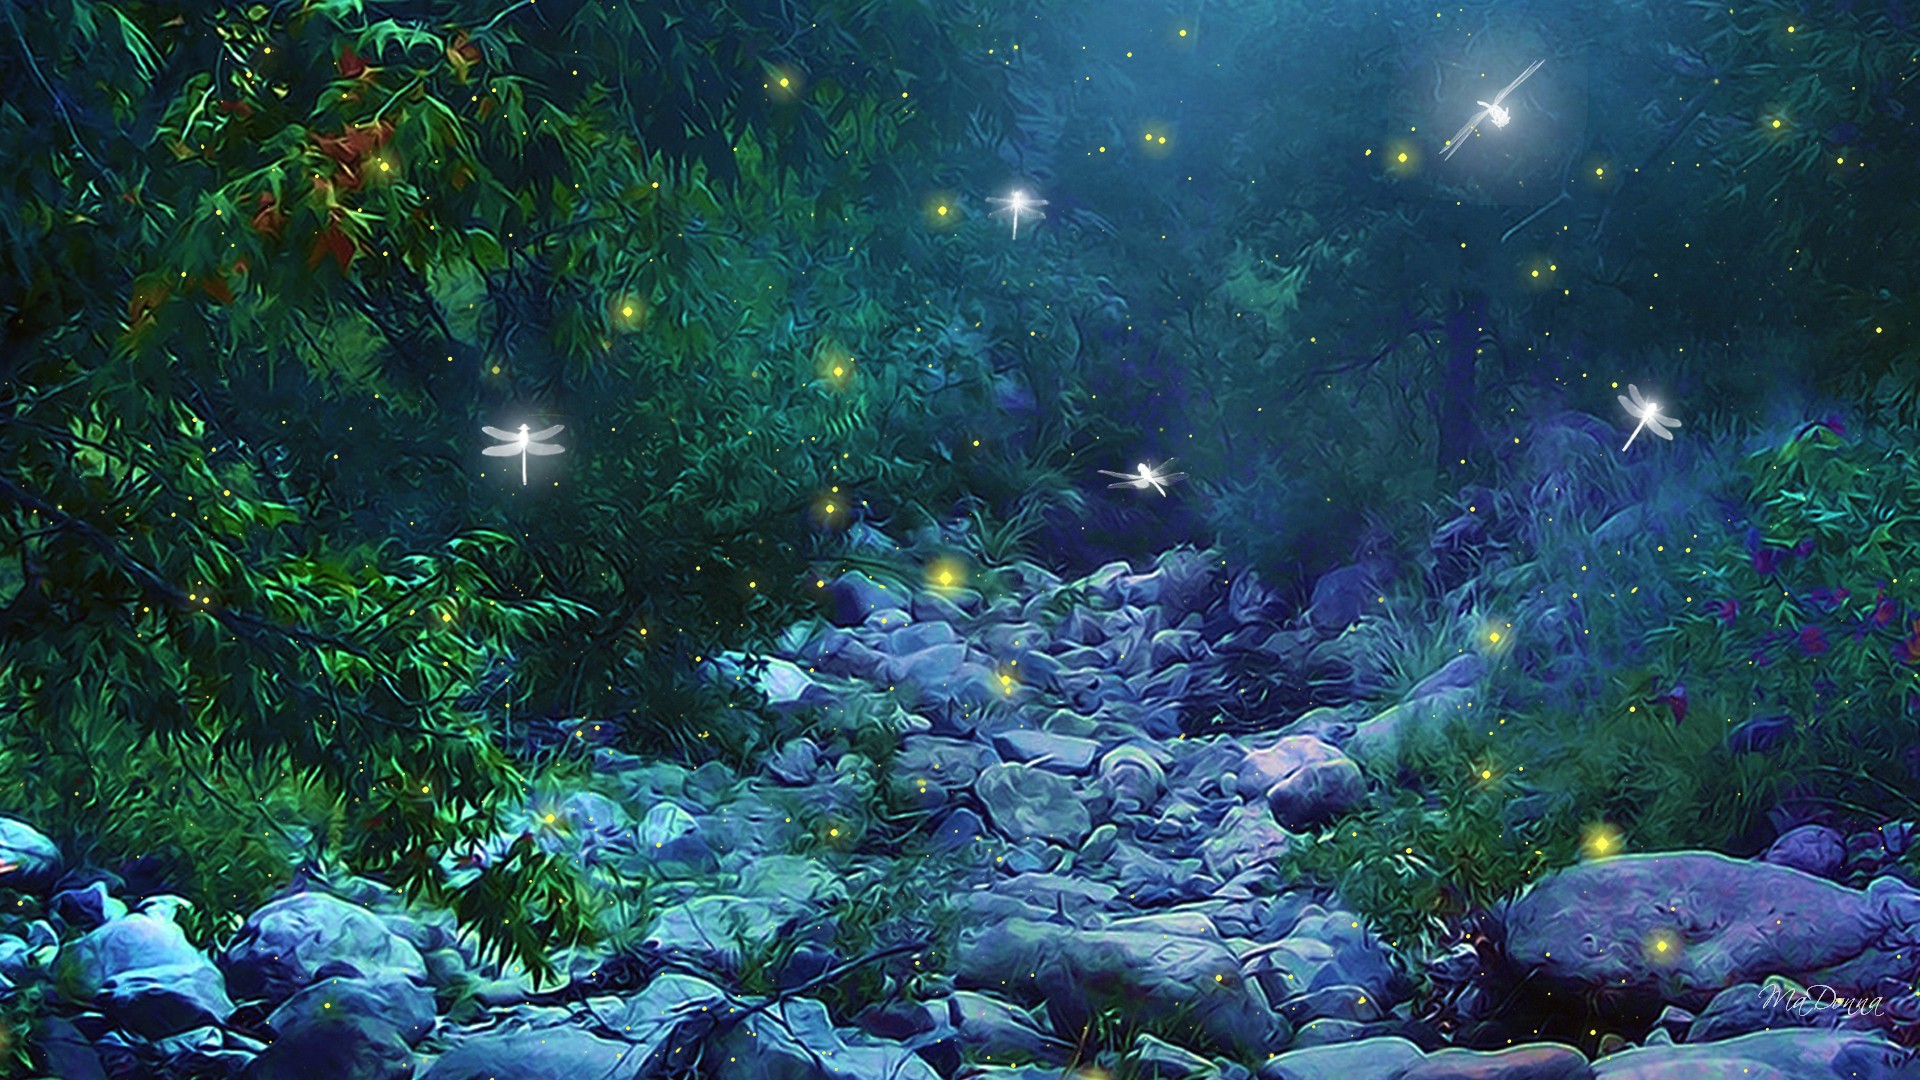 fantasy, Art, Nature, Trees, Forest, Woods, Magic, Insects, Firefly, Night, Glow, Lights Wallpaper